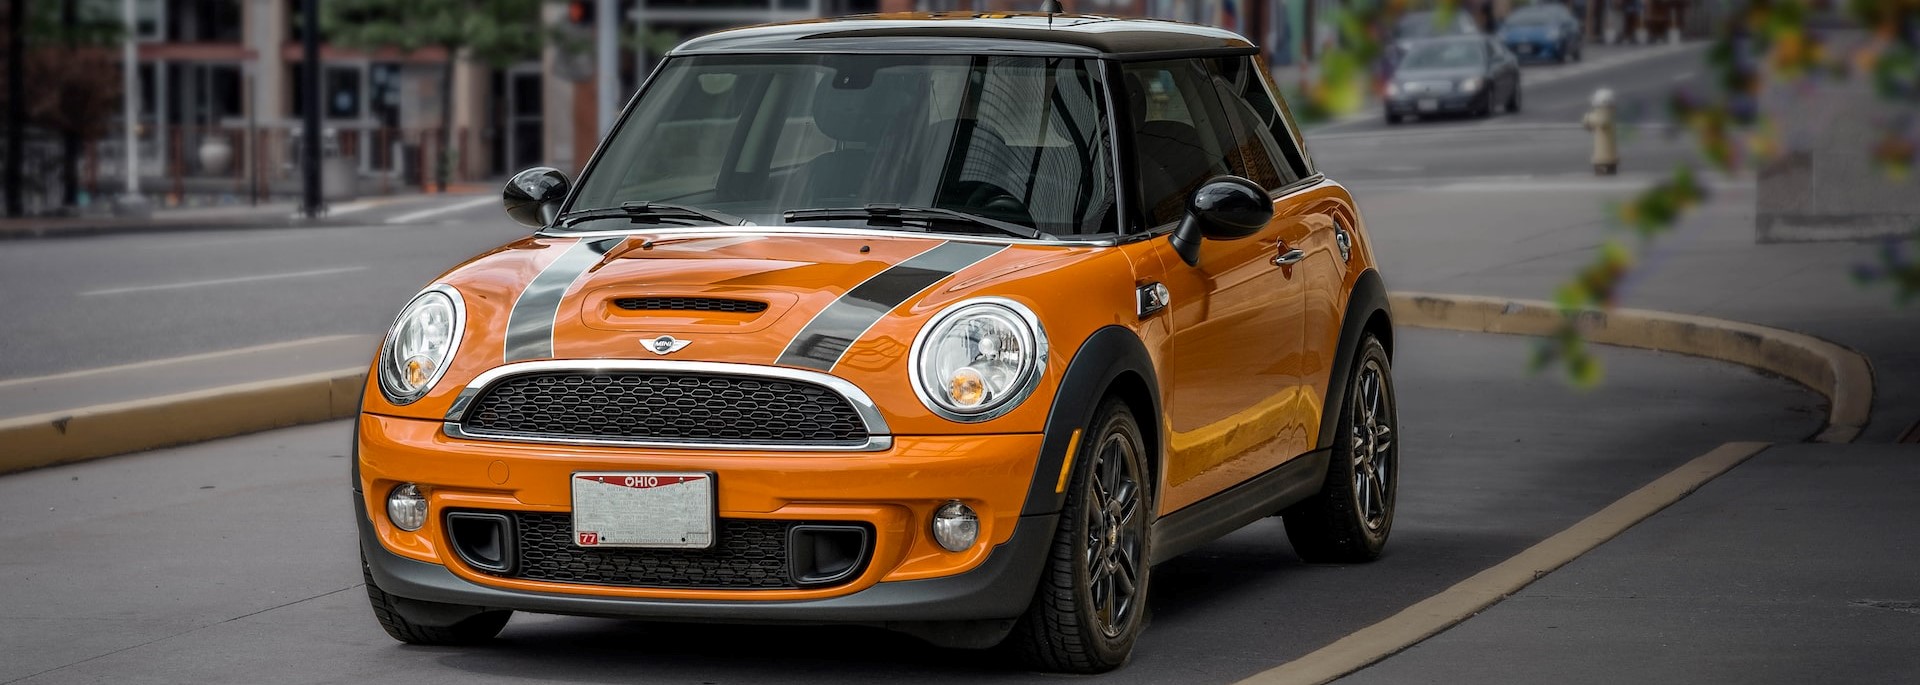 Mini cooper parked | Kids Car Donations